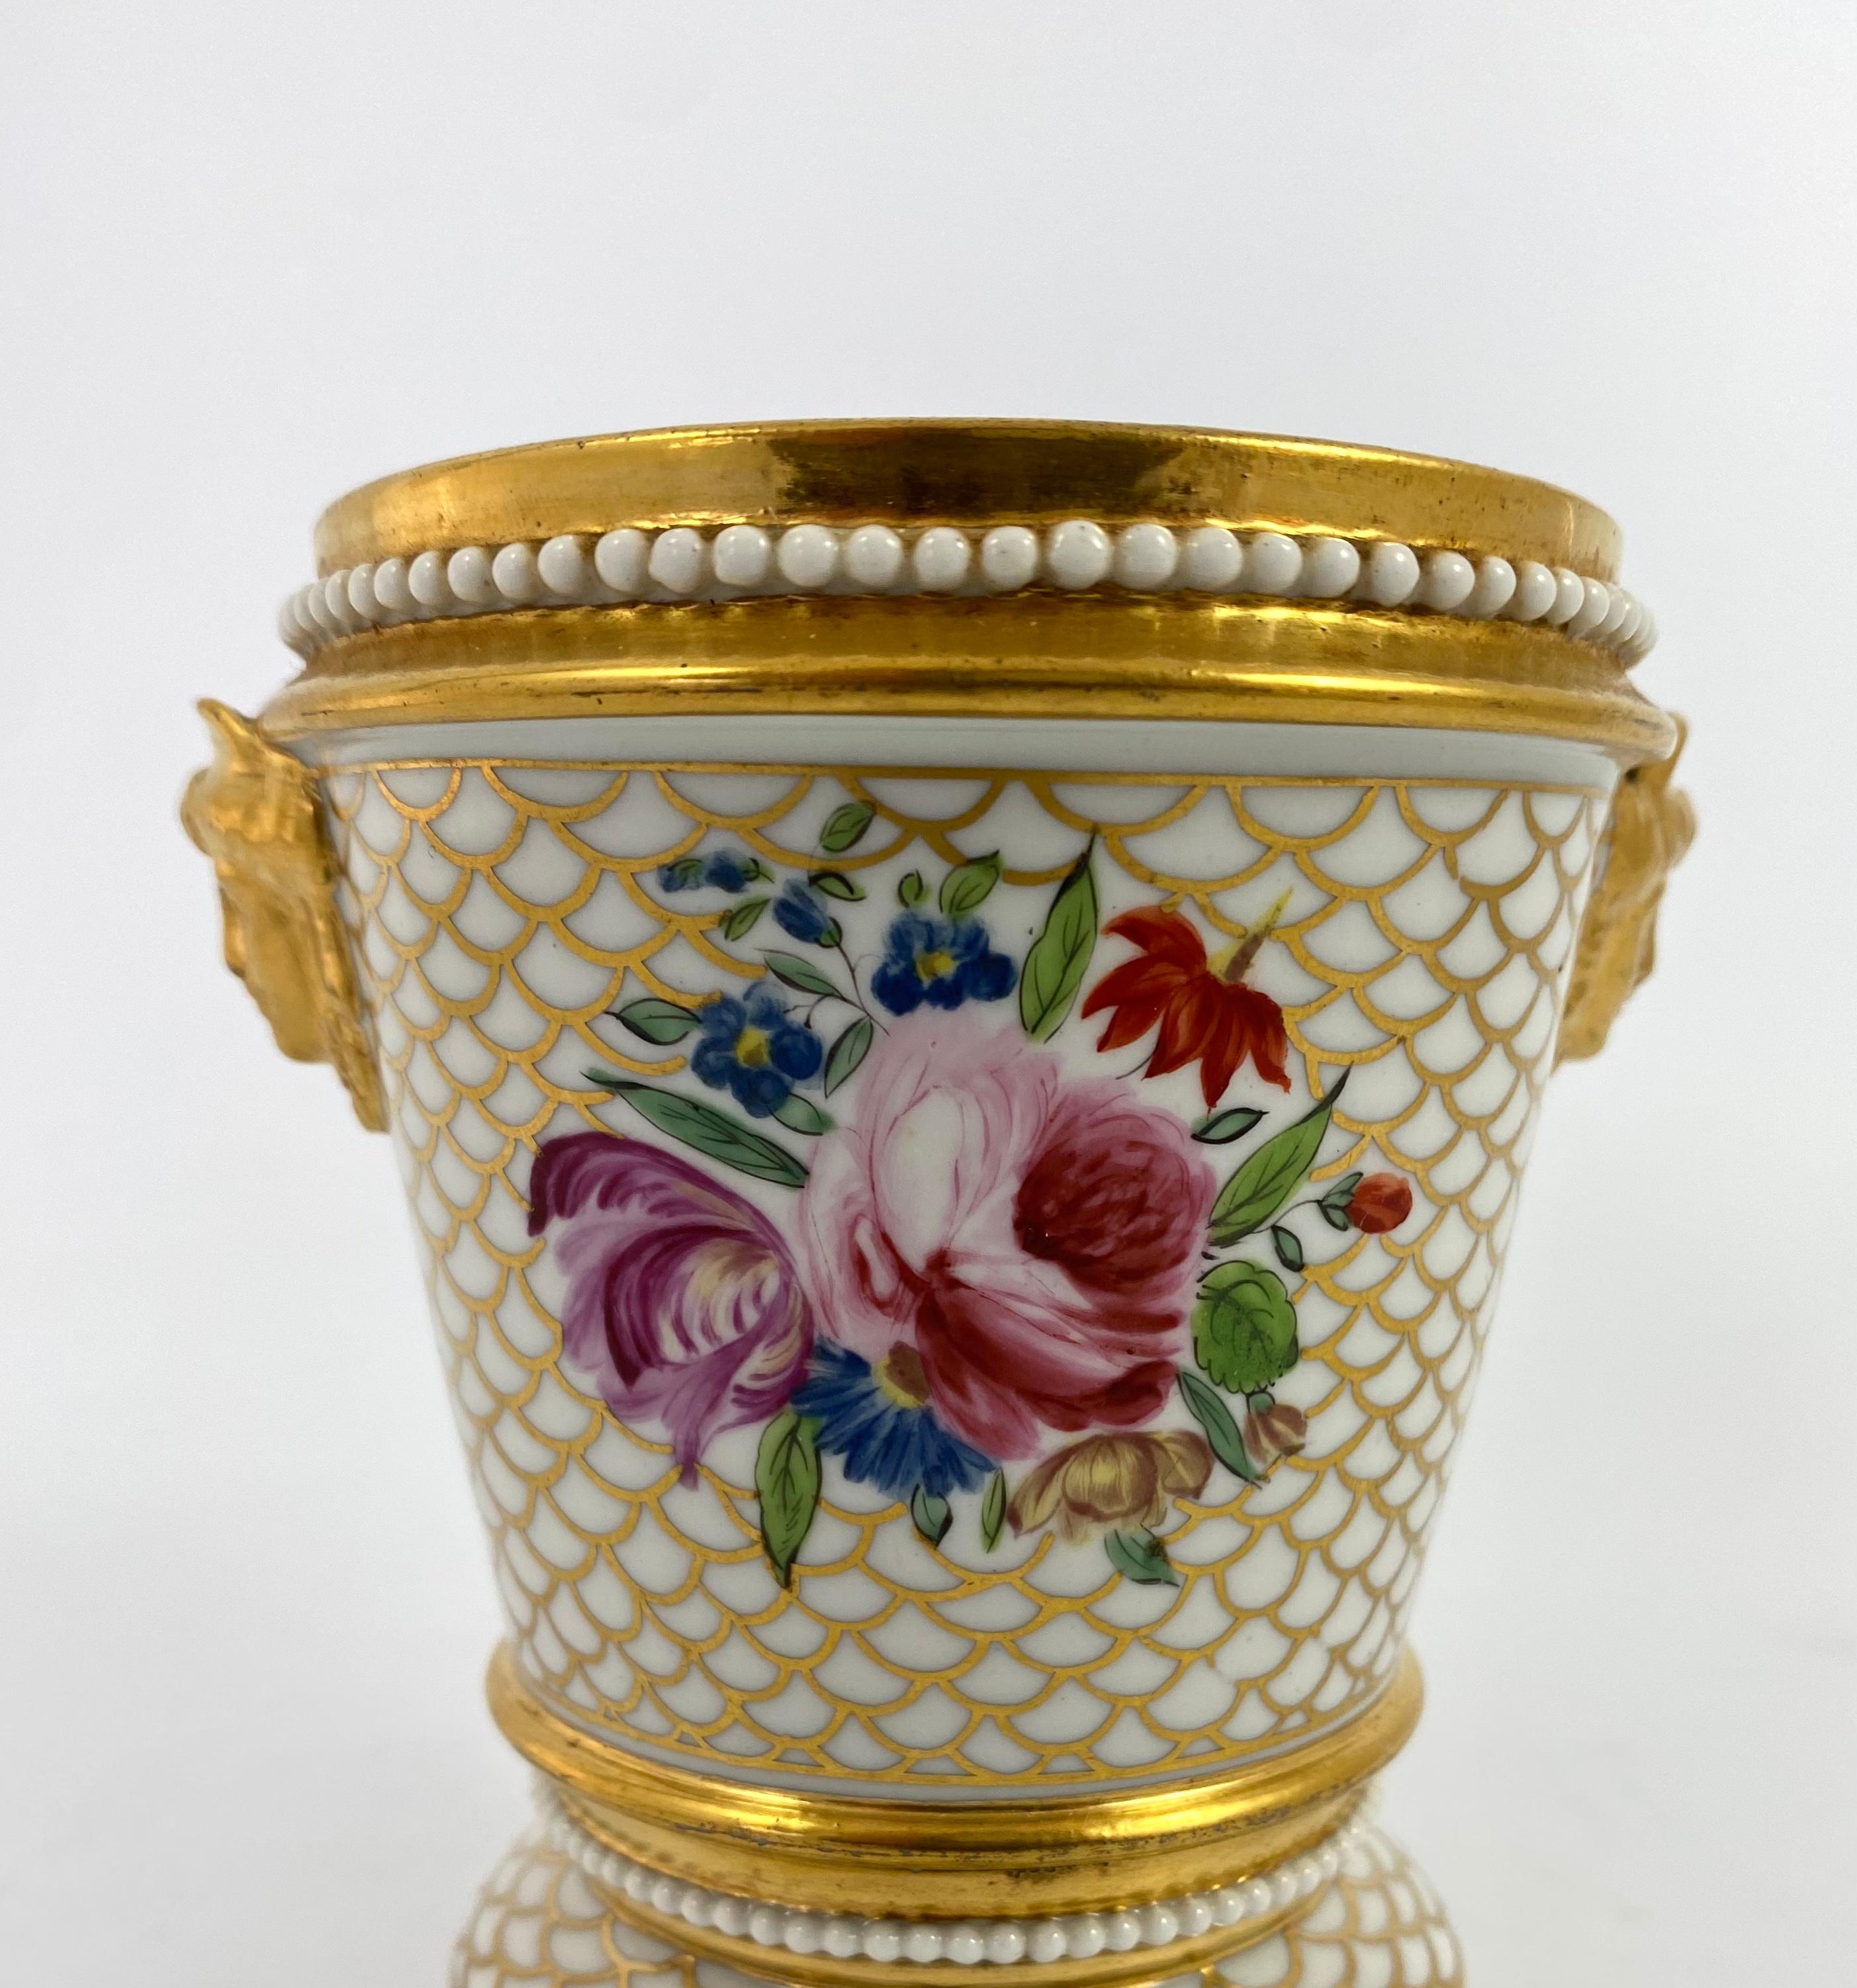 Fired English Porcelain Cache Pot and Cover, c. 1820